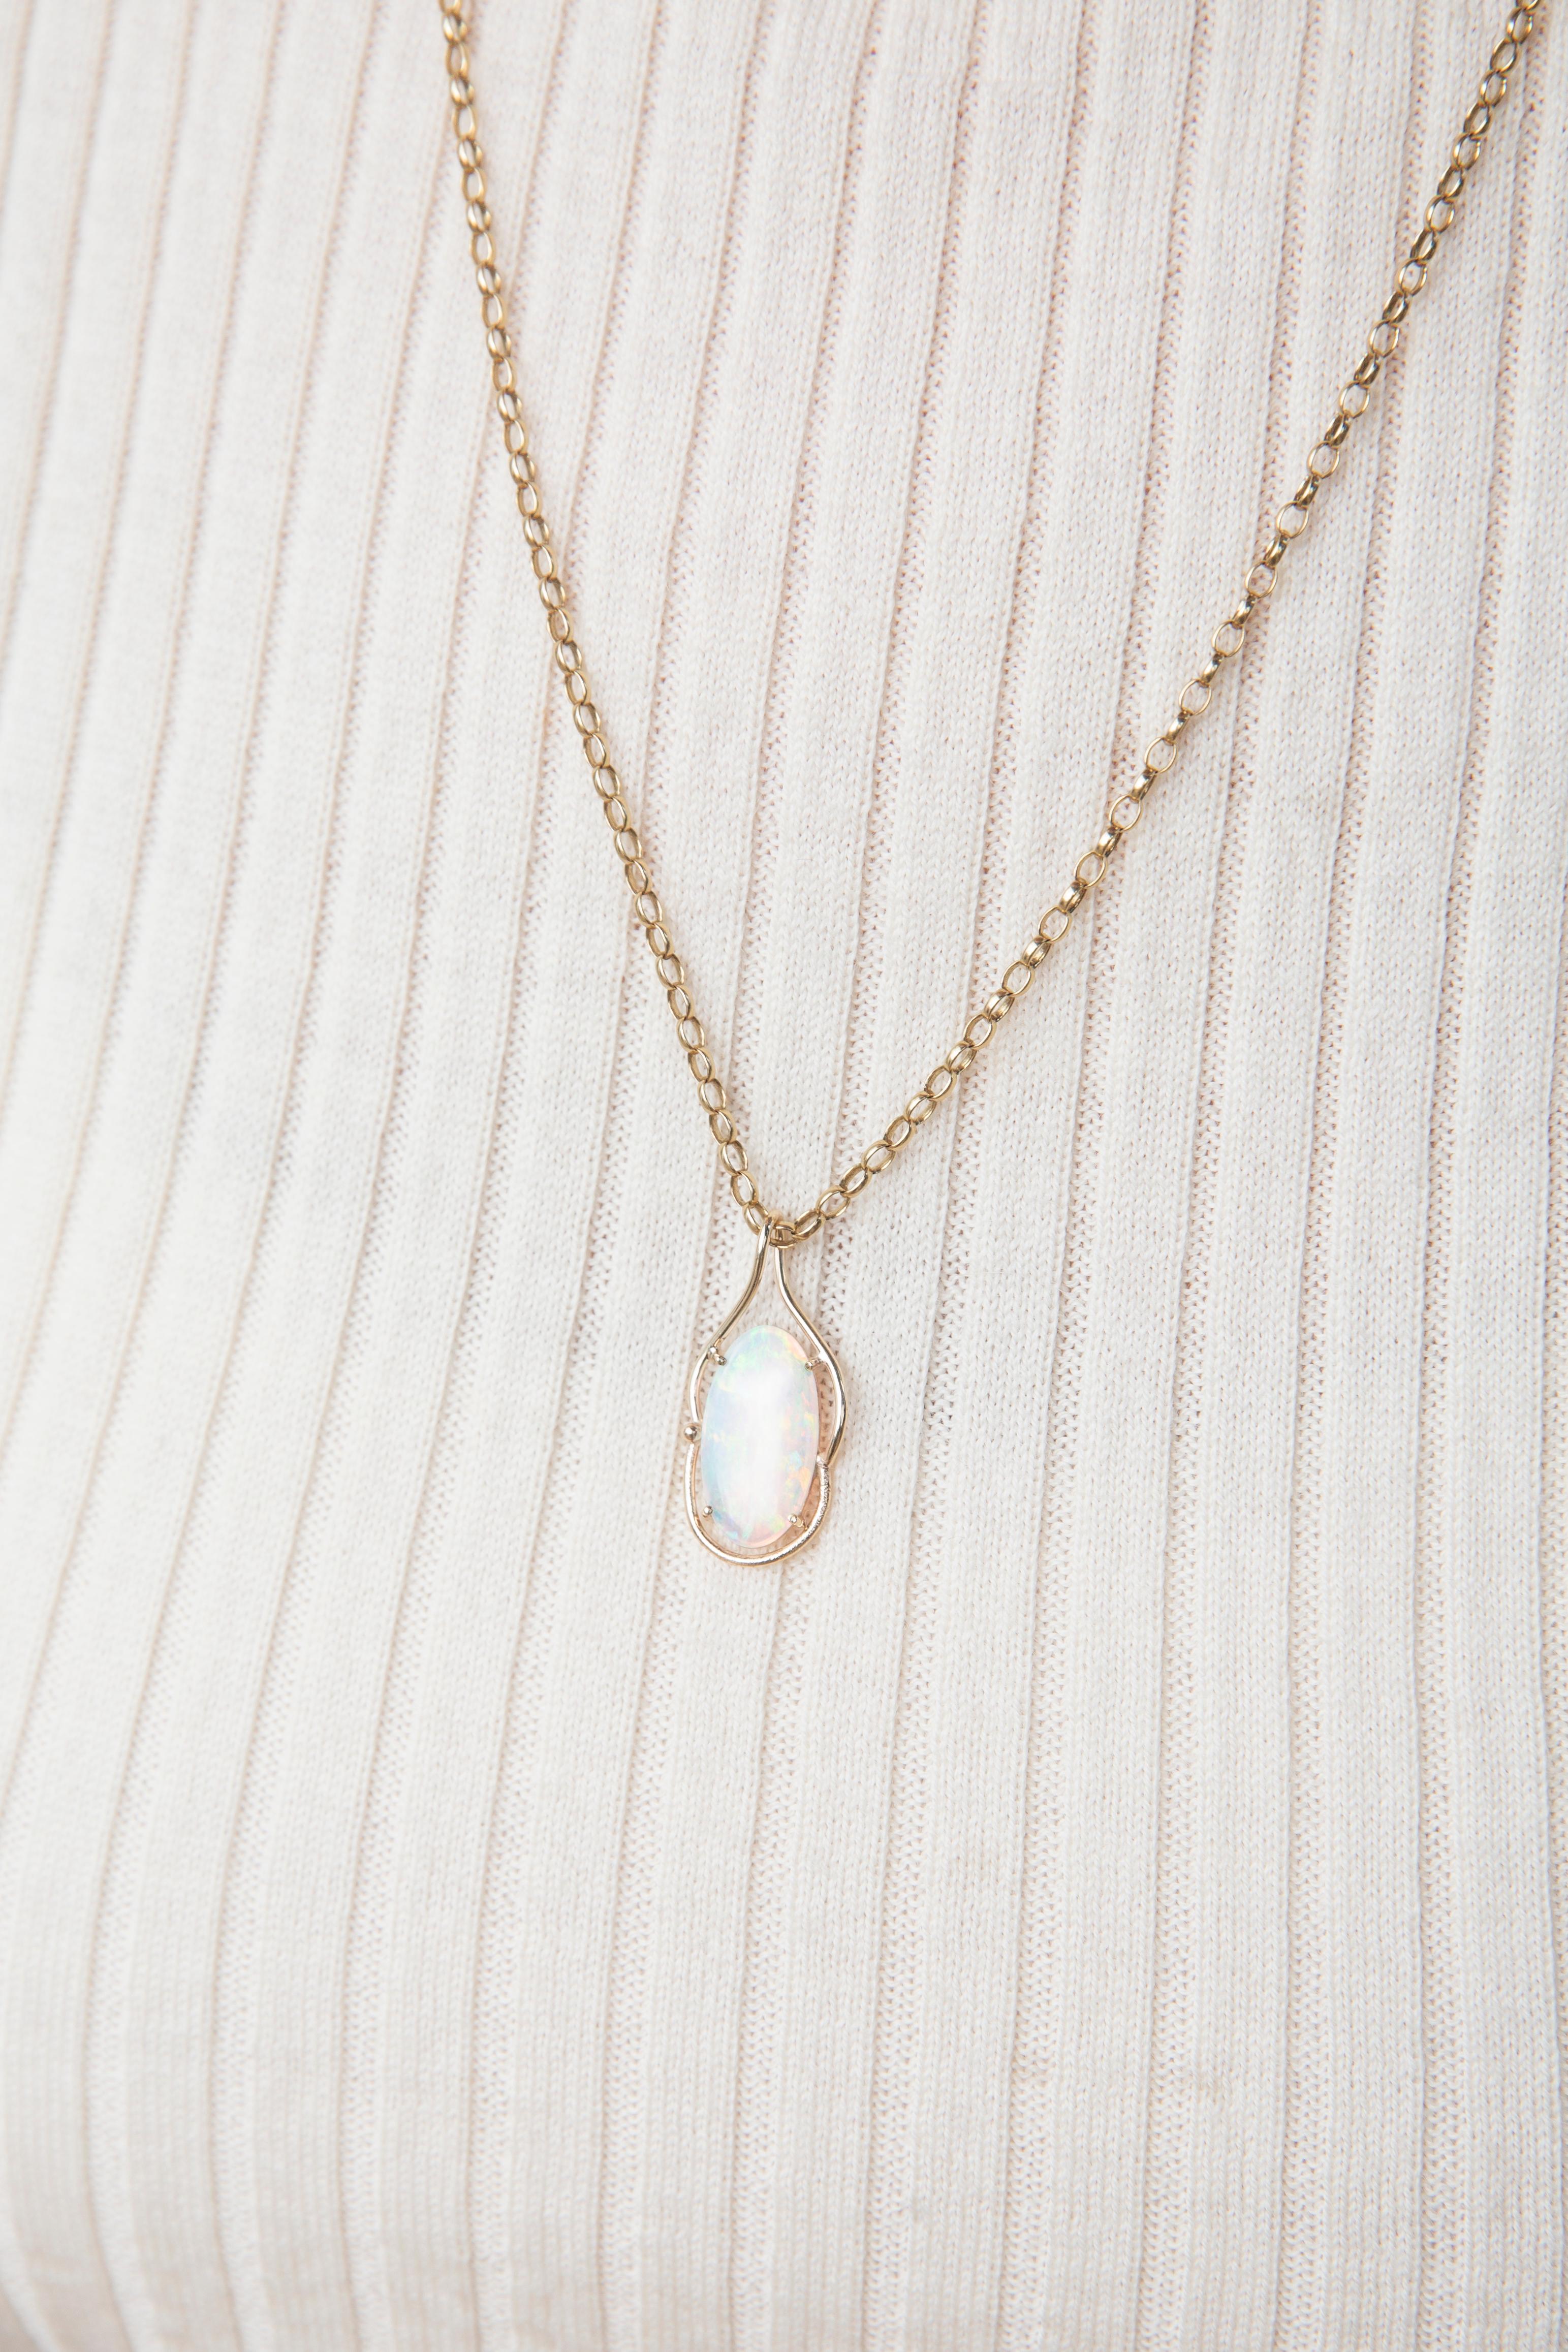 Crafted in 9 carat yellow gold, this opulent pendant features a gorgeous oval Australian crystal opal alive dreamy green and orange play of colour and set into an elegant wire frame. Her name is The Hannah Pendant. She is threaded with an elegant